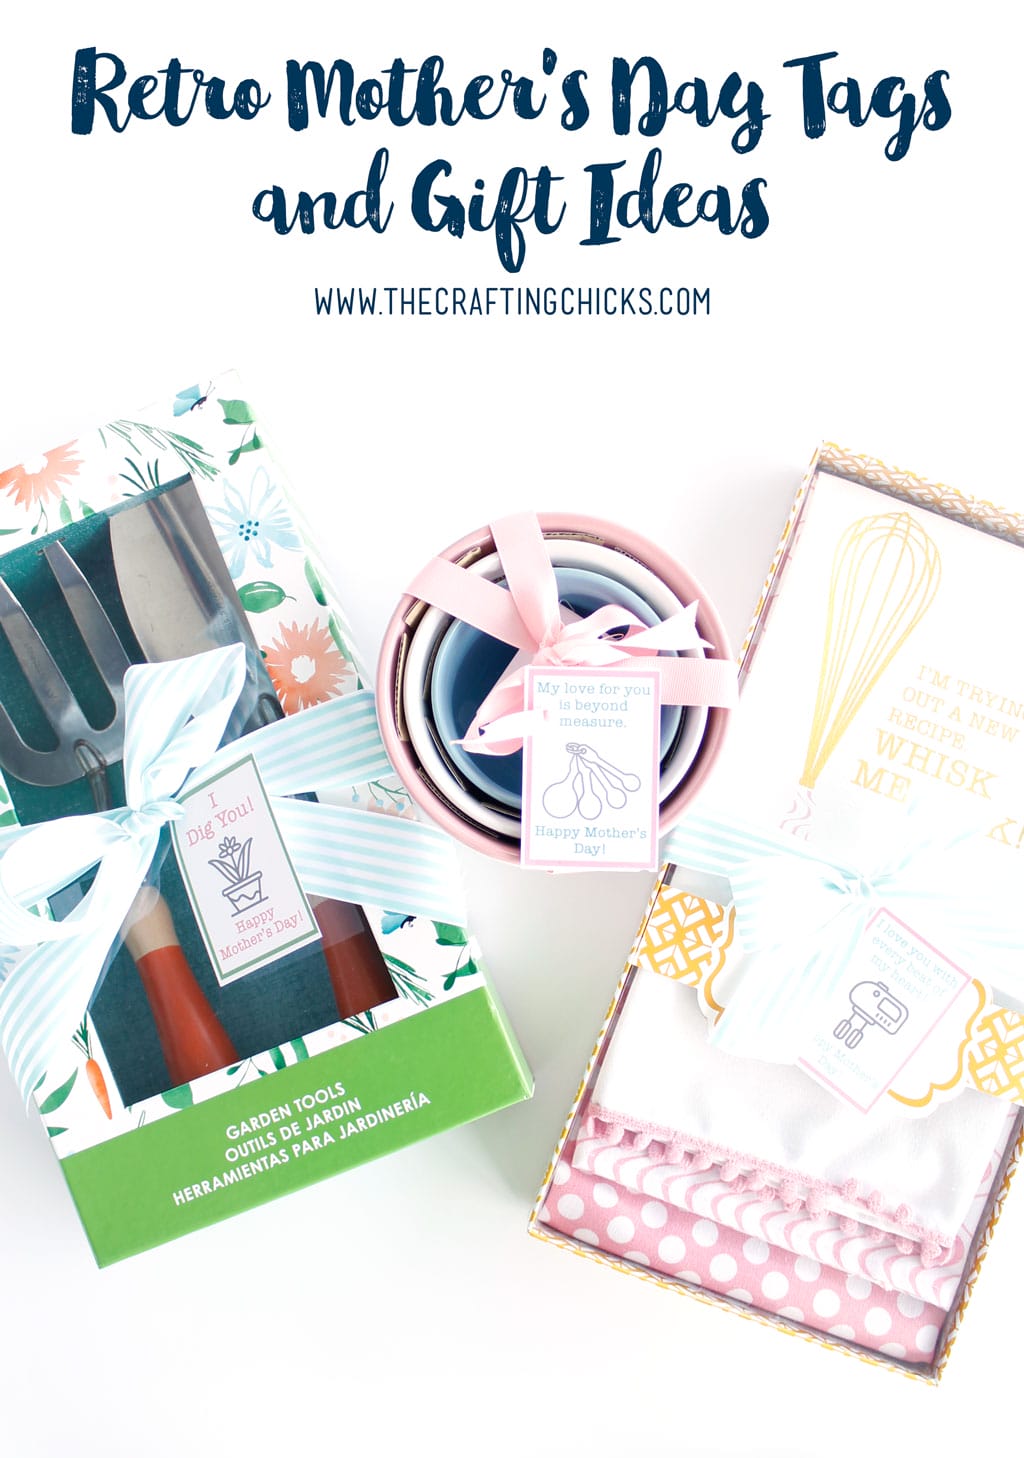 Retro Mother's Day Tags and Gift Ideas